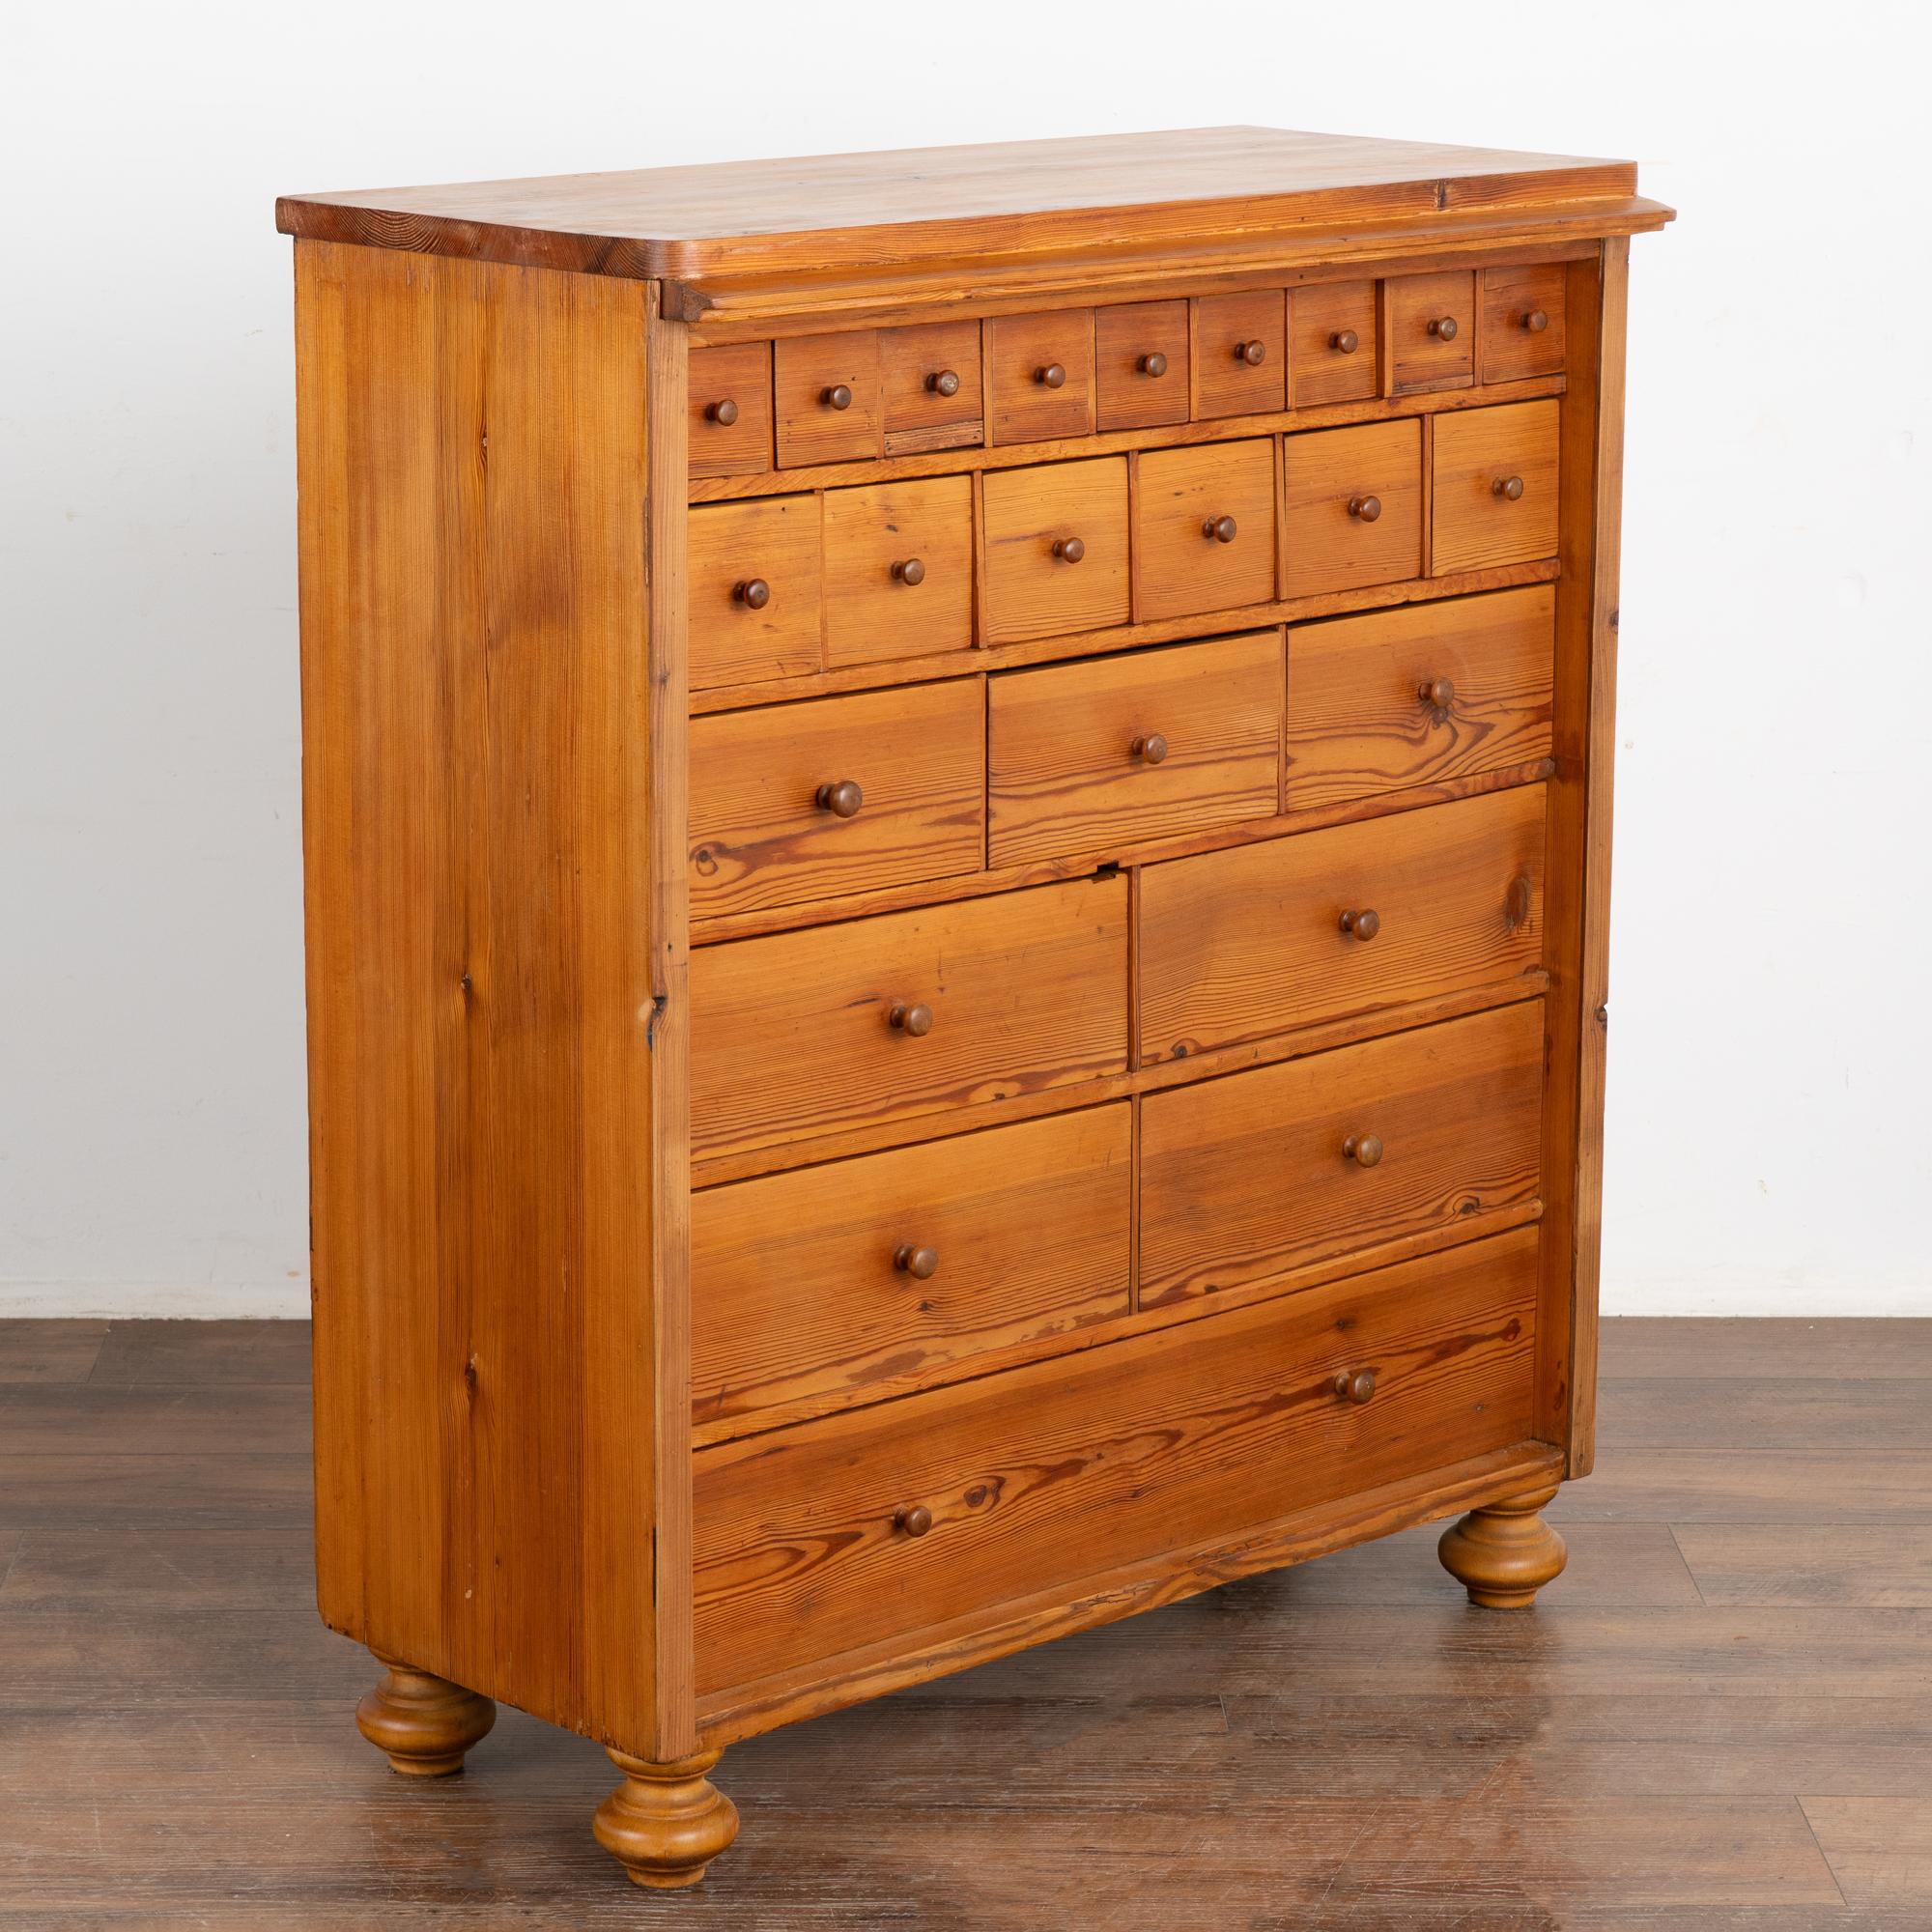 This pine apothecary is both a fun and functional chest of various sized drawers.
The many drawers with wooden pulls will serve well to organize and store items for a craft room or workshop.
Restored with a wax finish, each drawer functions. Note a